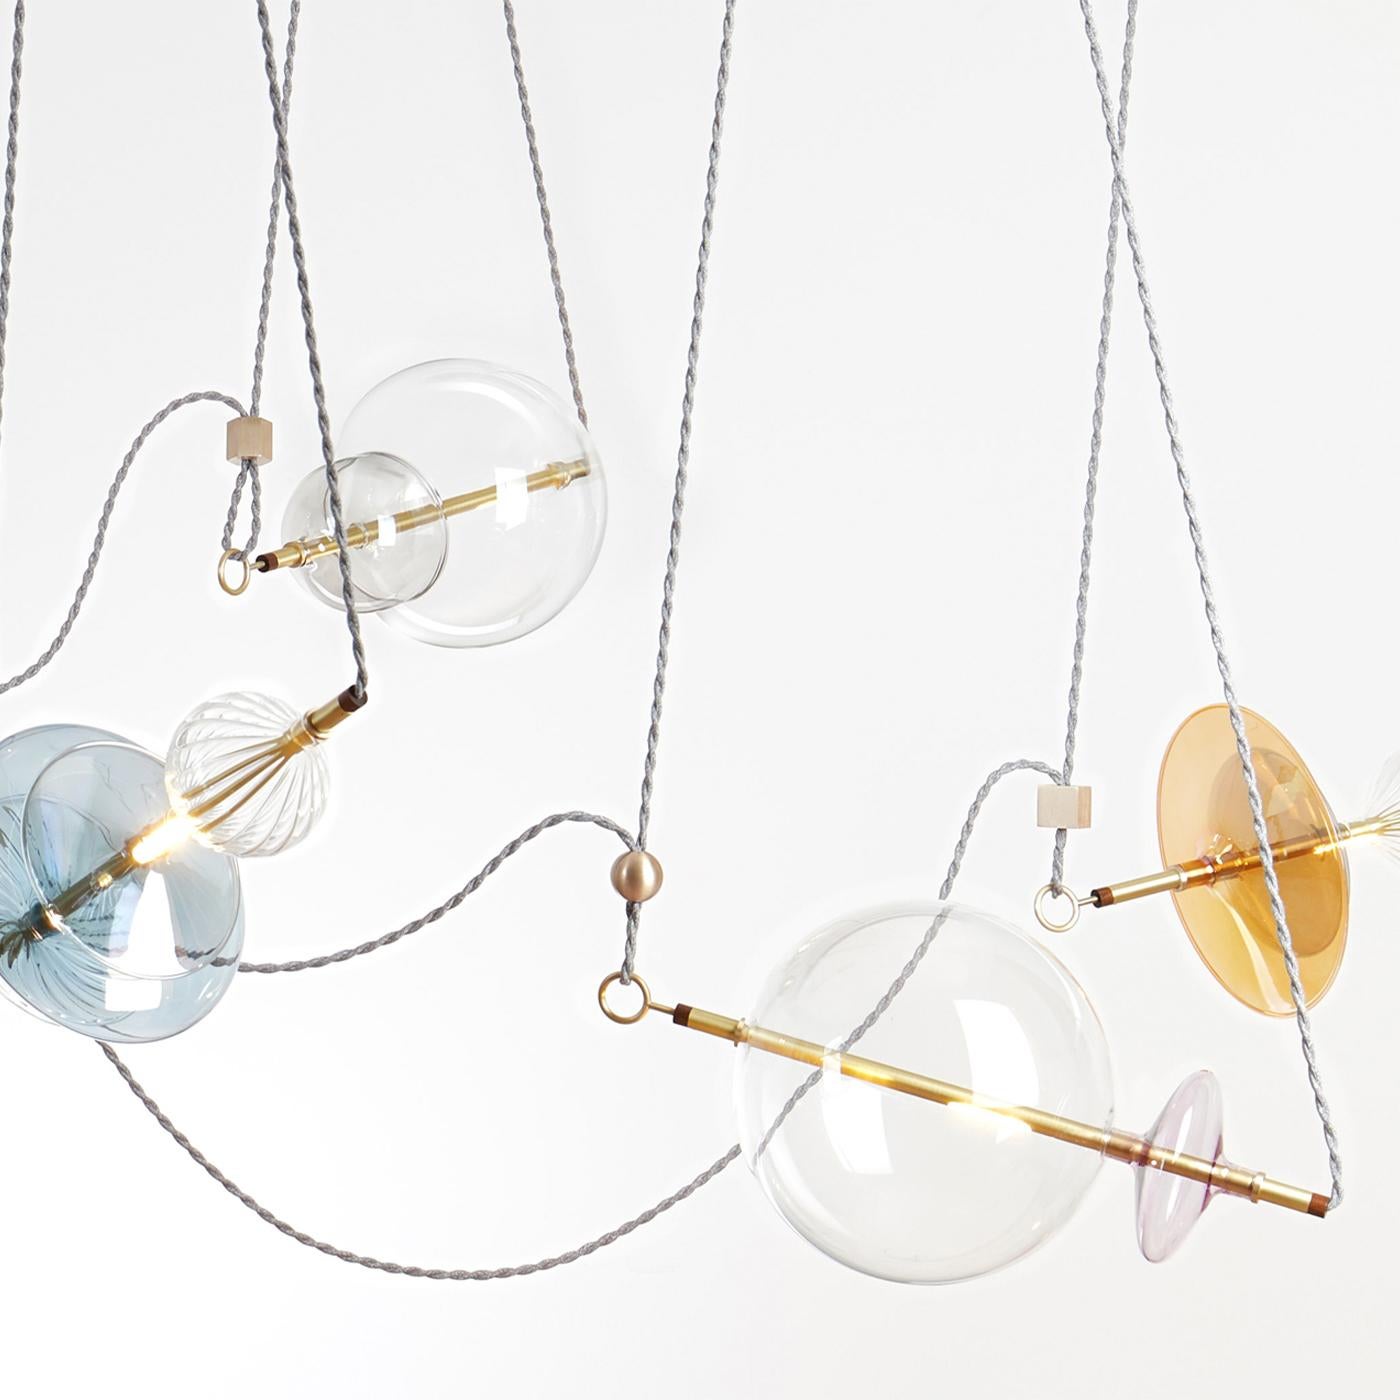 The Trapezi is a stunning contemporary chandelier inspired by a circus trapeze act and finished and assembled in Italy. The spectacular lighting fixture combines handblown glass, transparent or hand-painted A Lustro which mixes color with gold